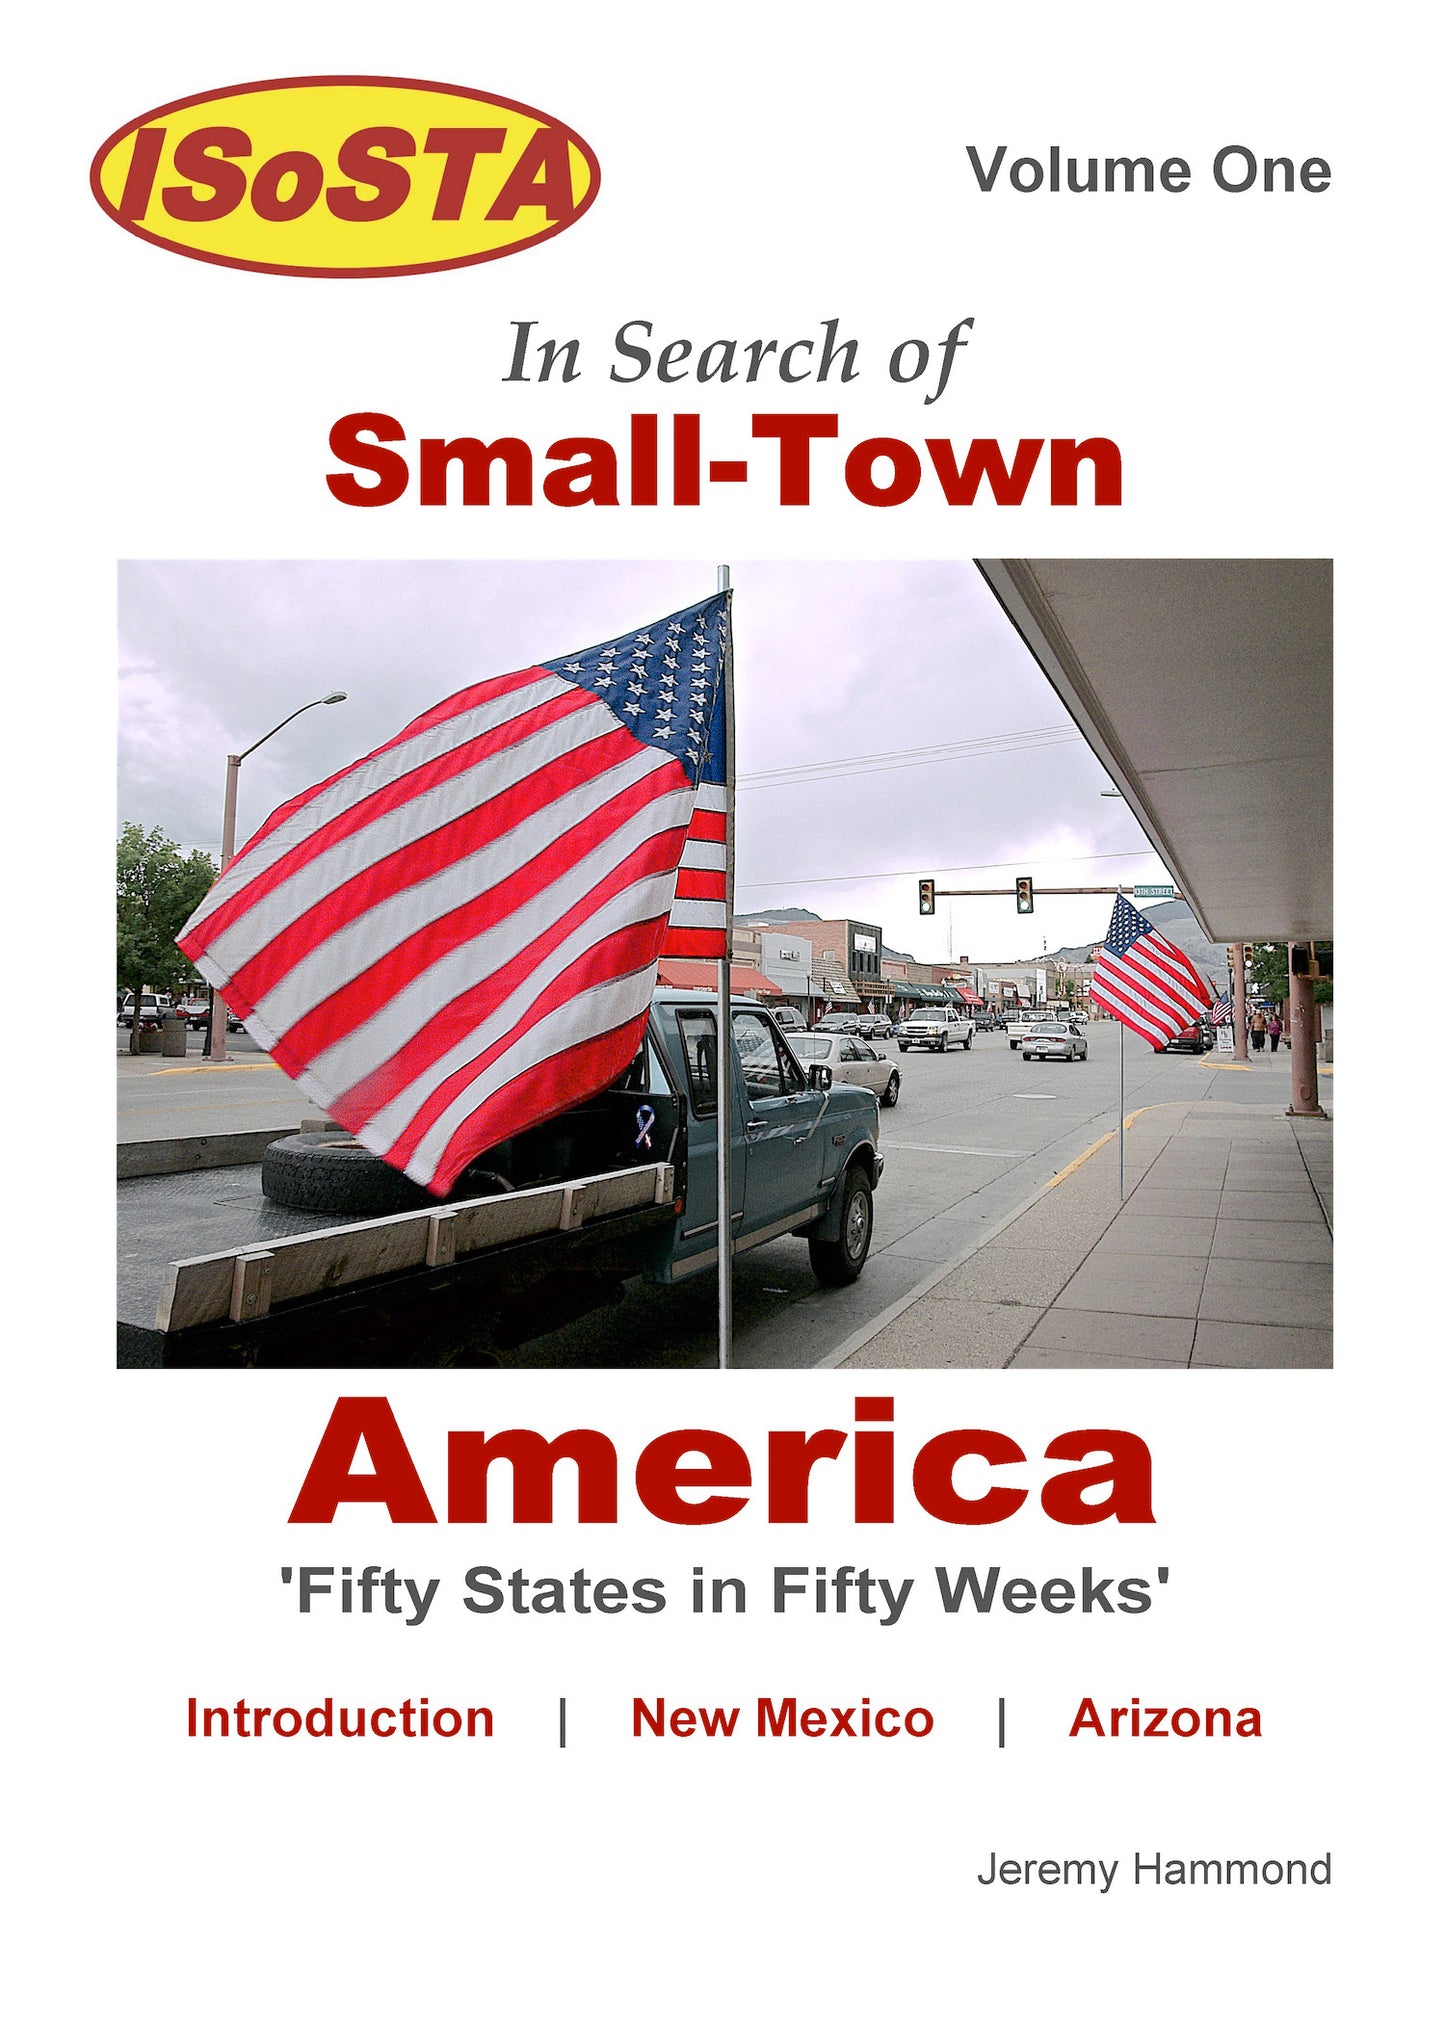 In Search of Small-Town America: Volume 1